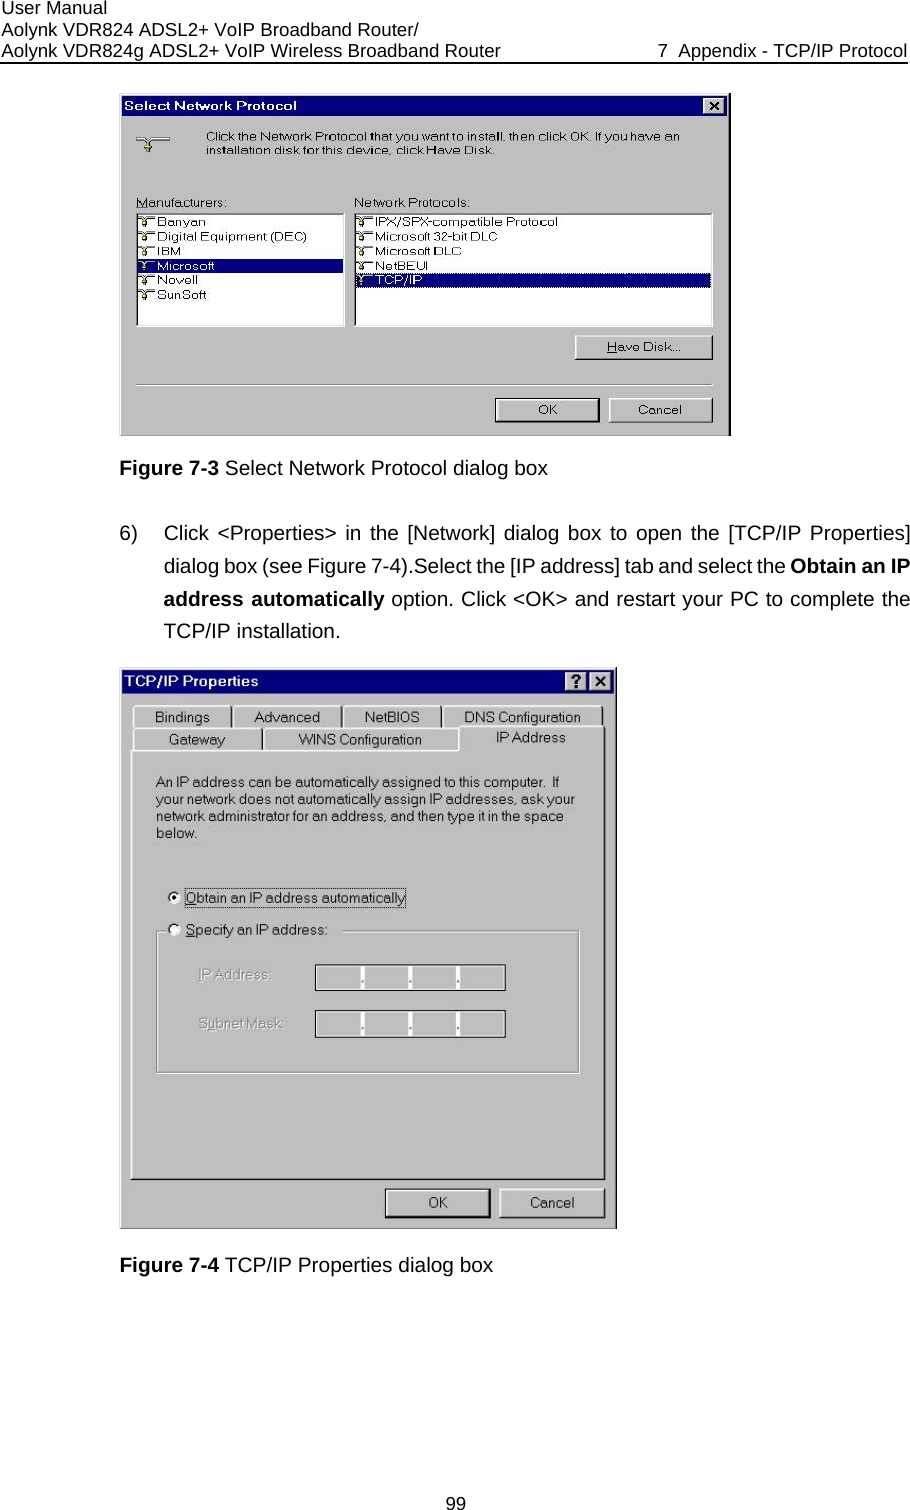 User Manual Aolynk VDR824 ADSL2+ VoIP Broadband Router/ Aolynk VDR824g ADSL2+ VoIP Wireless Broadband Router  7  Appendix - TCP/IP Protocol 99  og box to open the [TCP/IP Properties] ss] tab and select the Obtain an IP nd restart your PC to complete the Figure 7-3 Select Network Protocol dialog box 6)  Click &lt;Properties&gt; in the [Network] dialdialog box (see Figure 7-4).Select the [IP addreaddress automatically option. Click &lt;OK&gt; aTCP/IP installation.  Figure 7-4 TCP/IP Properties dialog box 